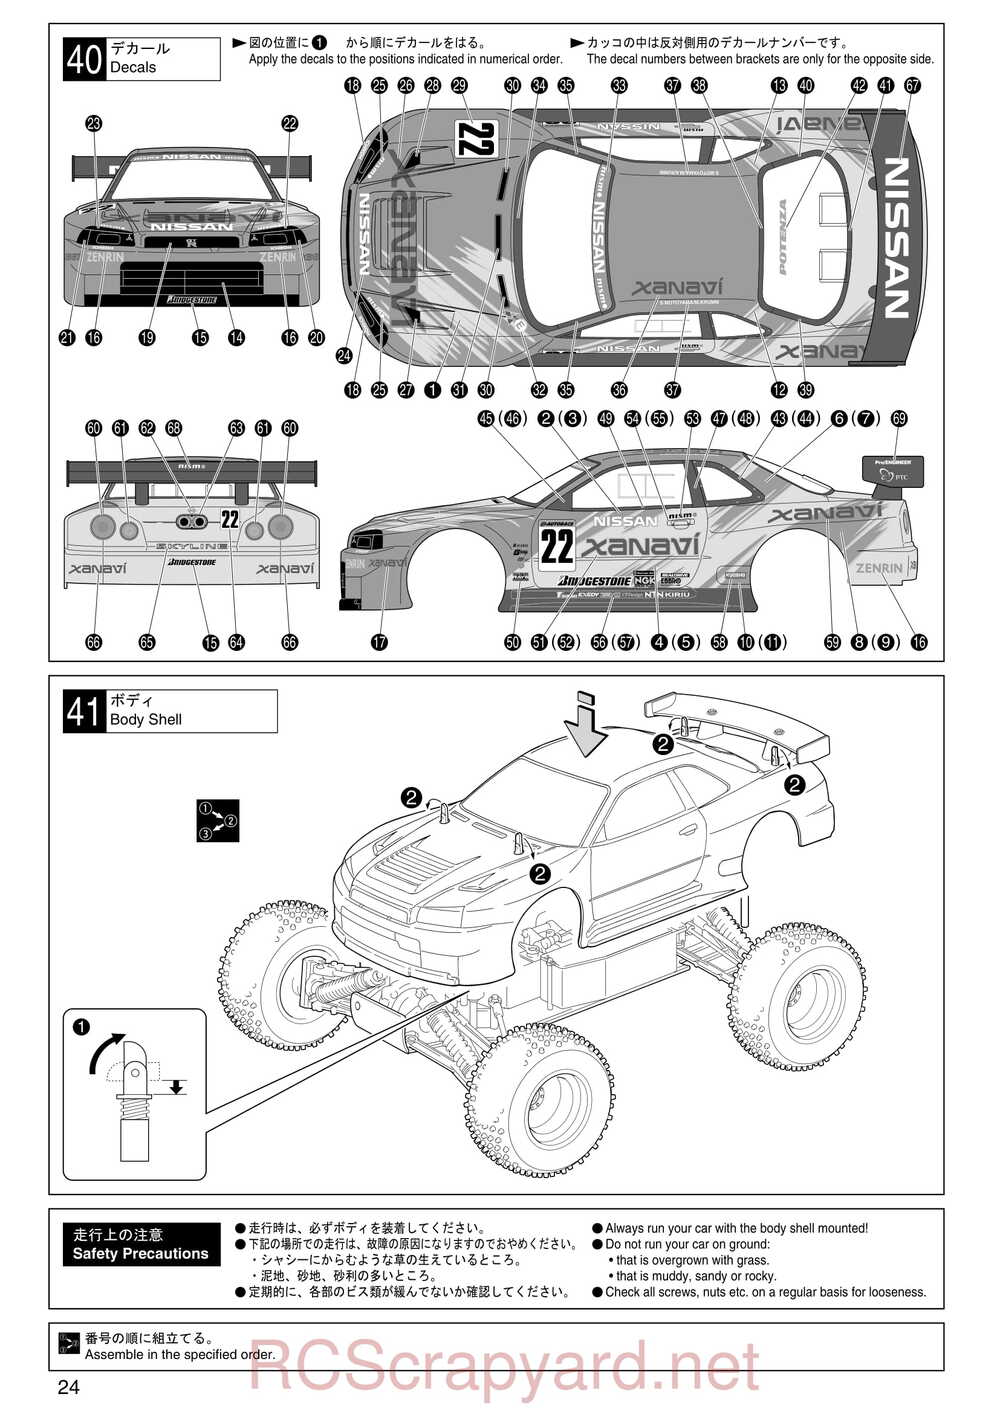 Kyosho - 31213 - TR-15 Monster-Touring - Manual - Page 24